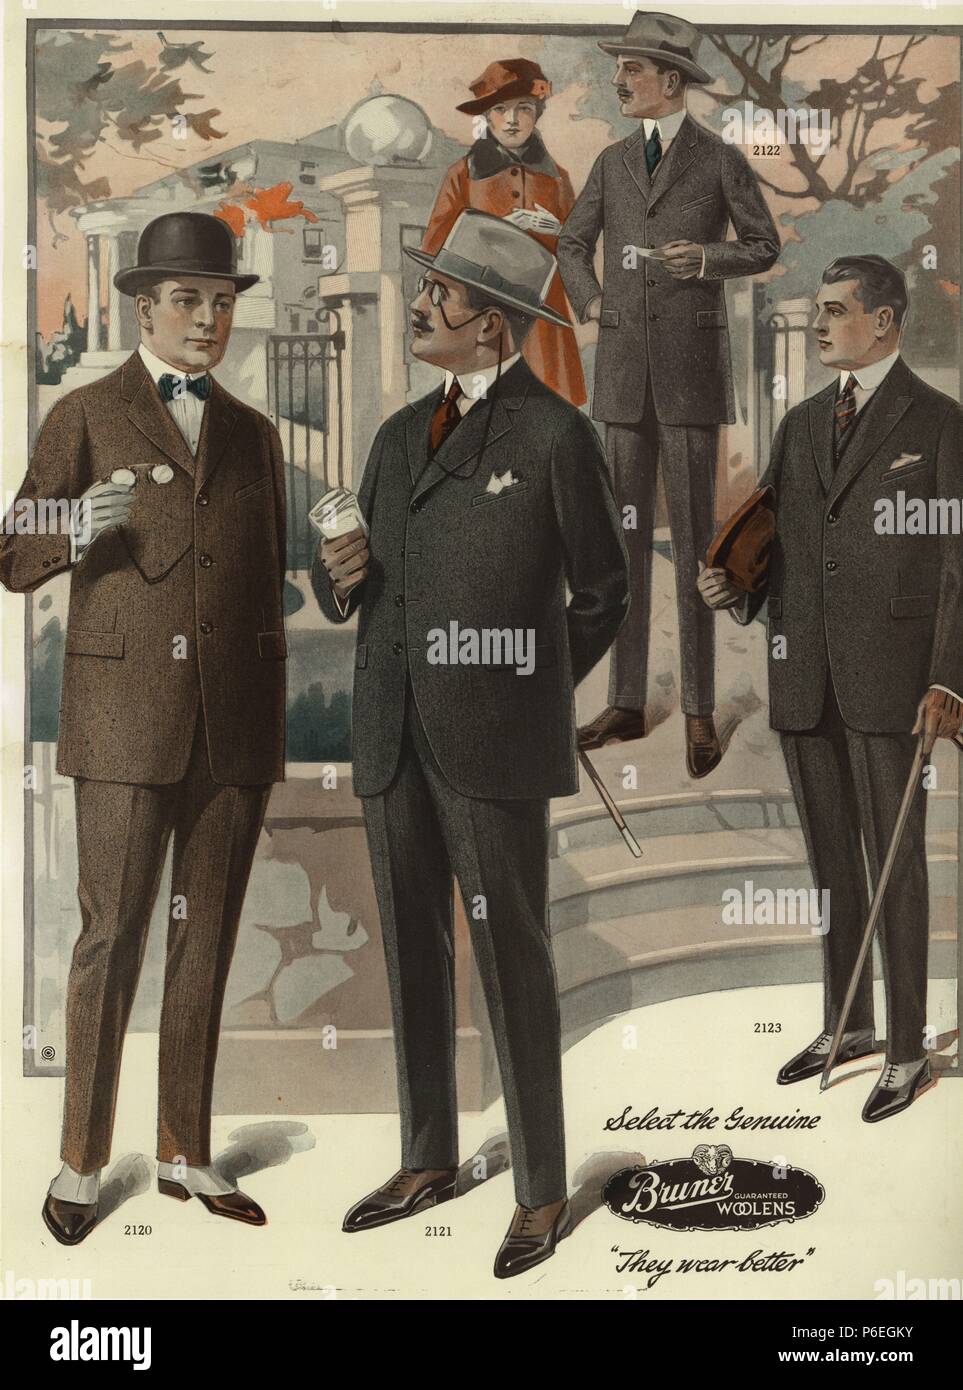 Men's conservative single-breasted suits in sack. Chromolithograph from a catalog of male winter fashions from Bruner Woolens, 1920. Stock Photo